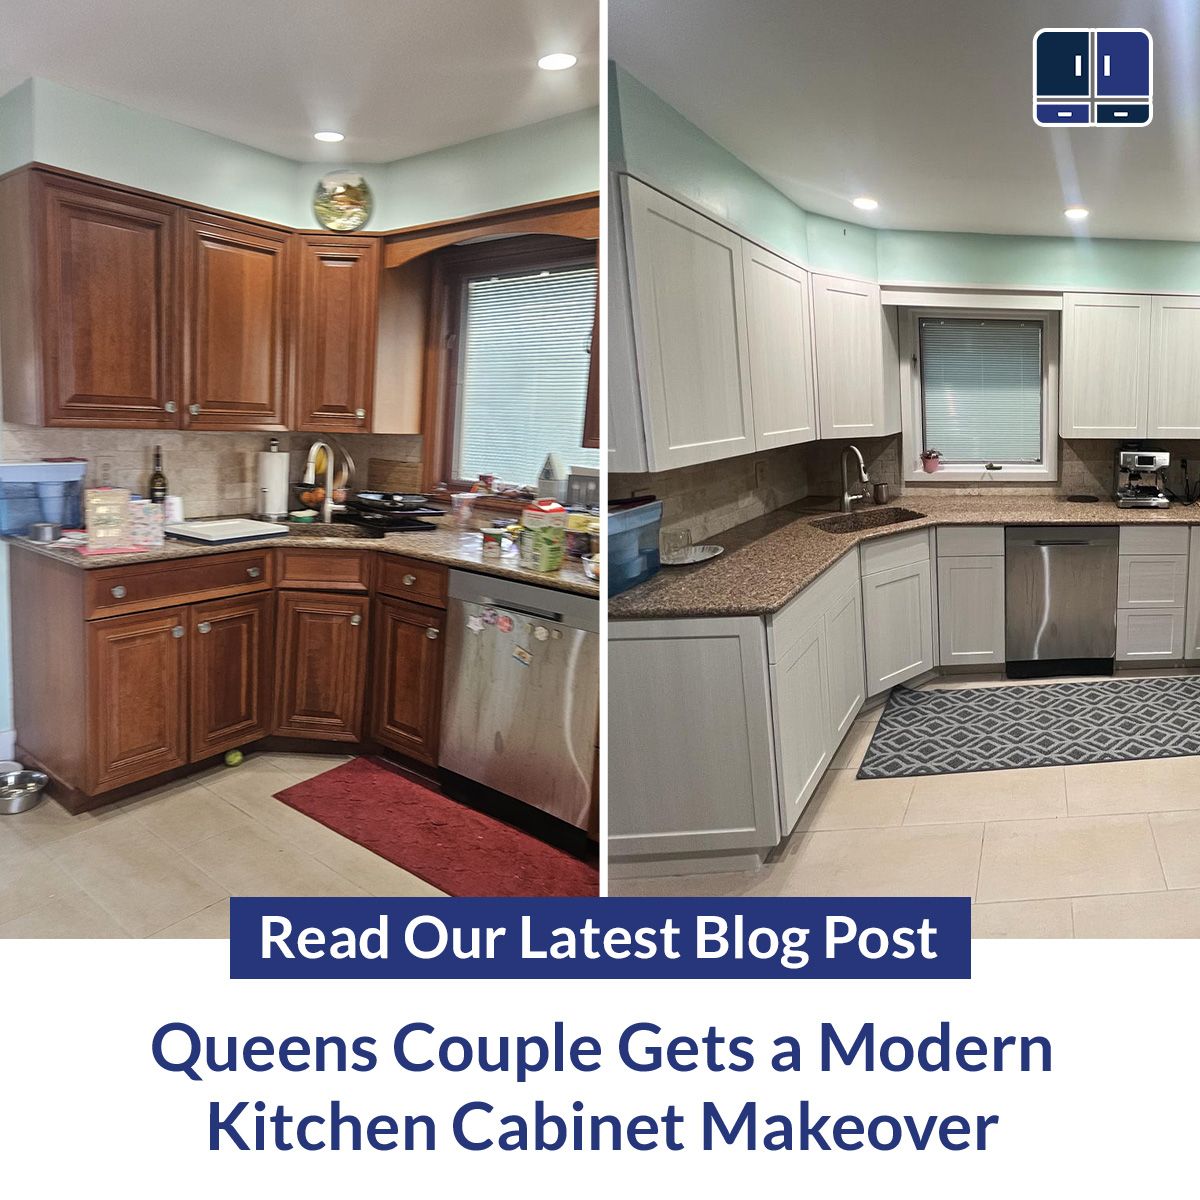 Queens Couple Gets a Modern Kitchen Cabinet Makeover